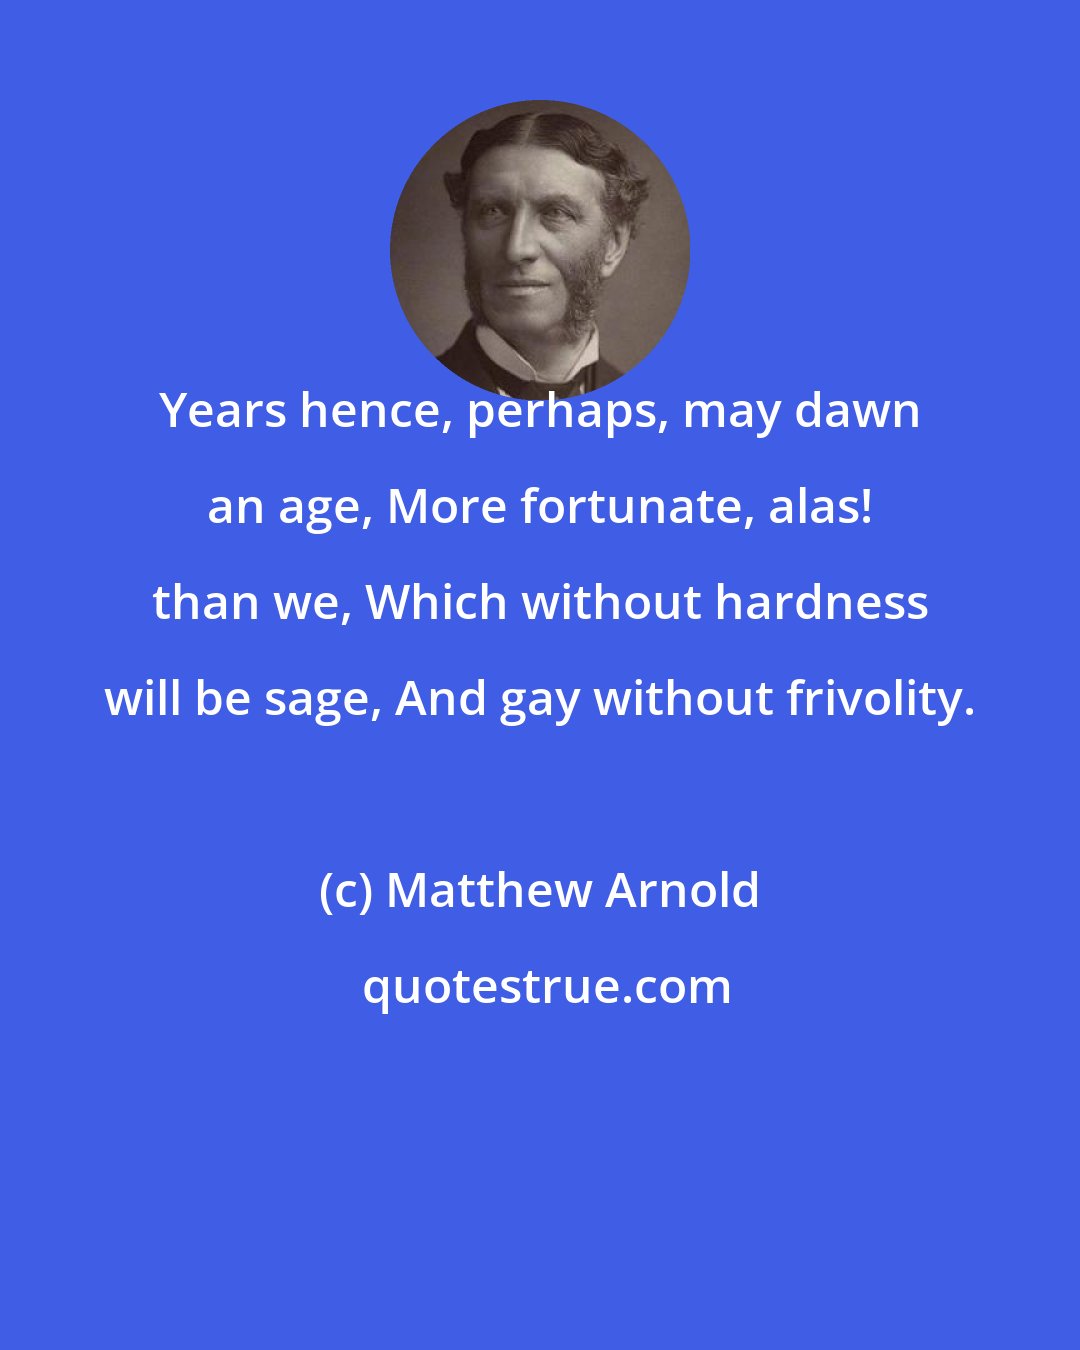 Matthew Arnold: Years hence, perhaps, may dawn an age, More fortunate, alas! than we, Which without hardness will be sage, And gay without frivolity.